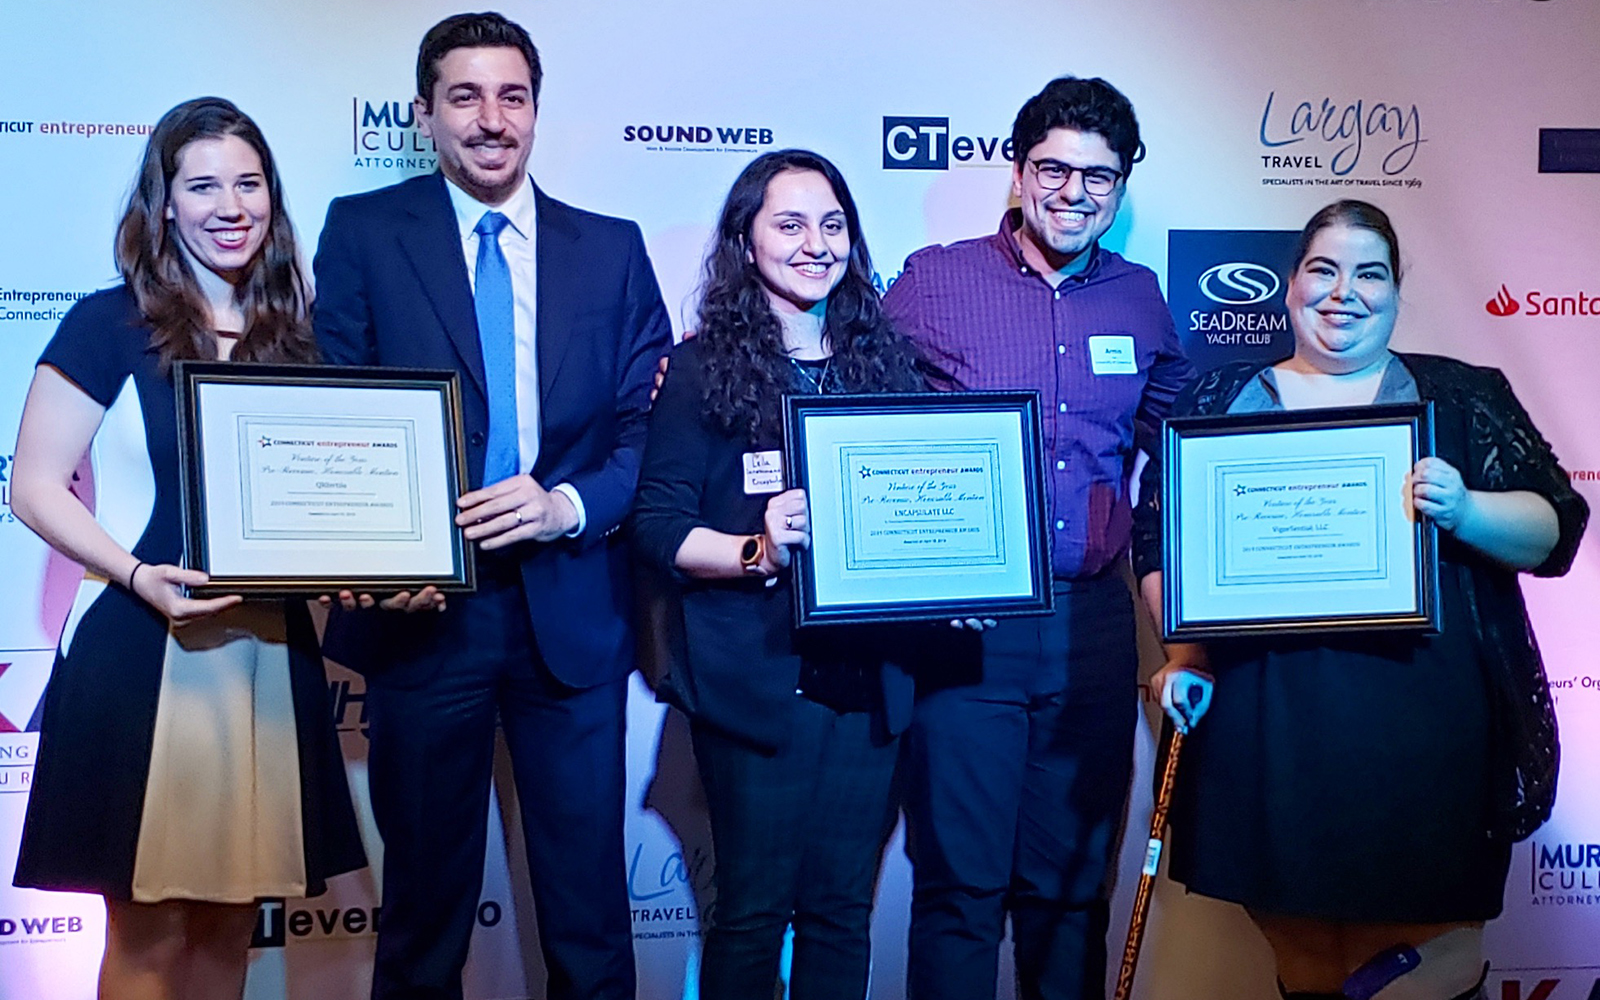 QRFertile, Encapsulate, and VigorSential, all UConn-grown startups, received awards. (Contributed Photo)